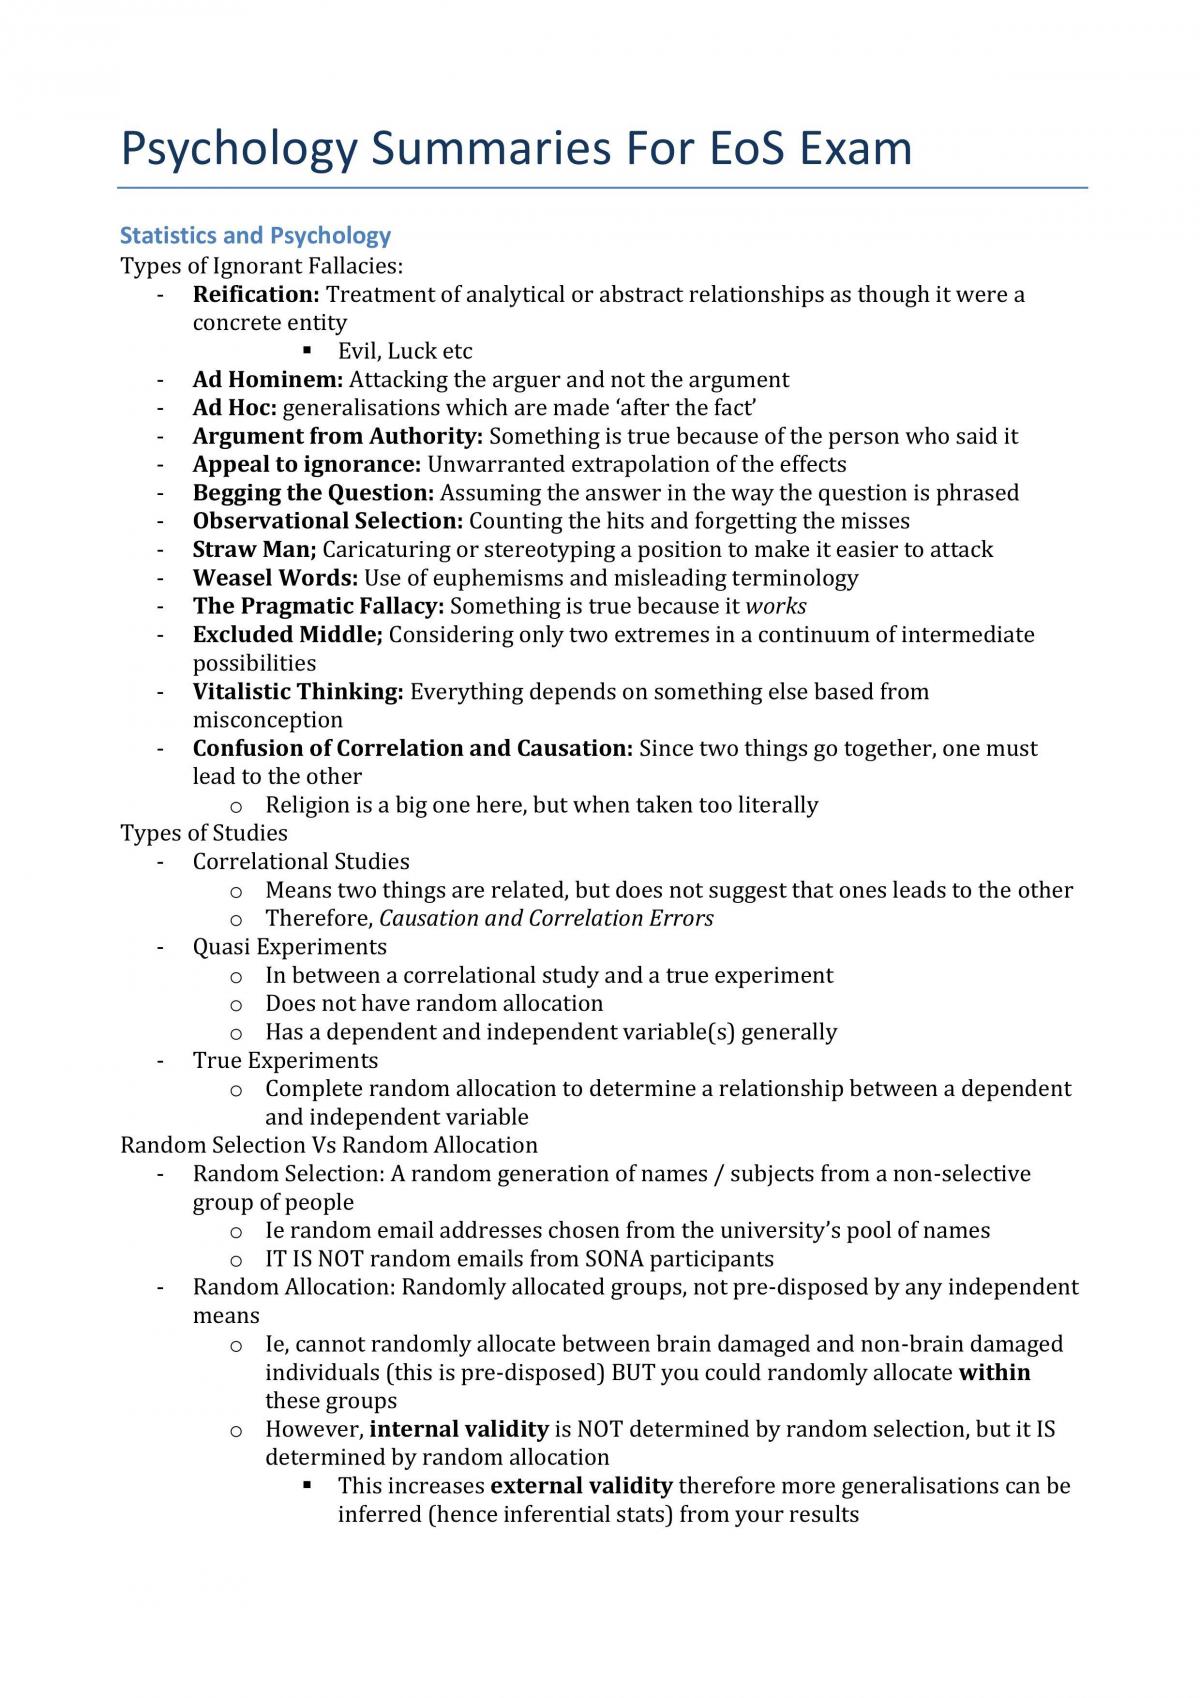 Lecture Summaries - Page 1